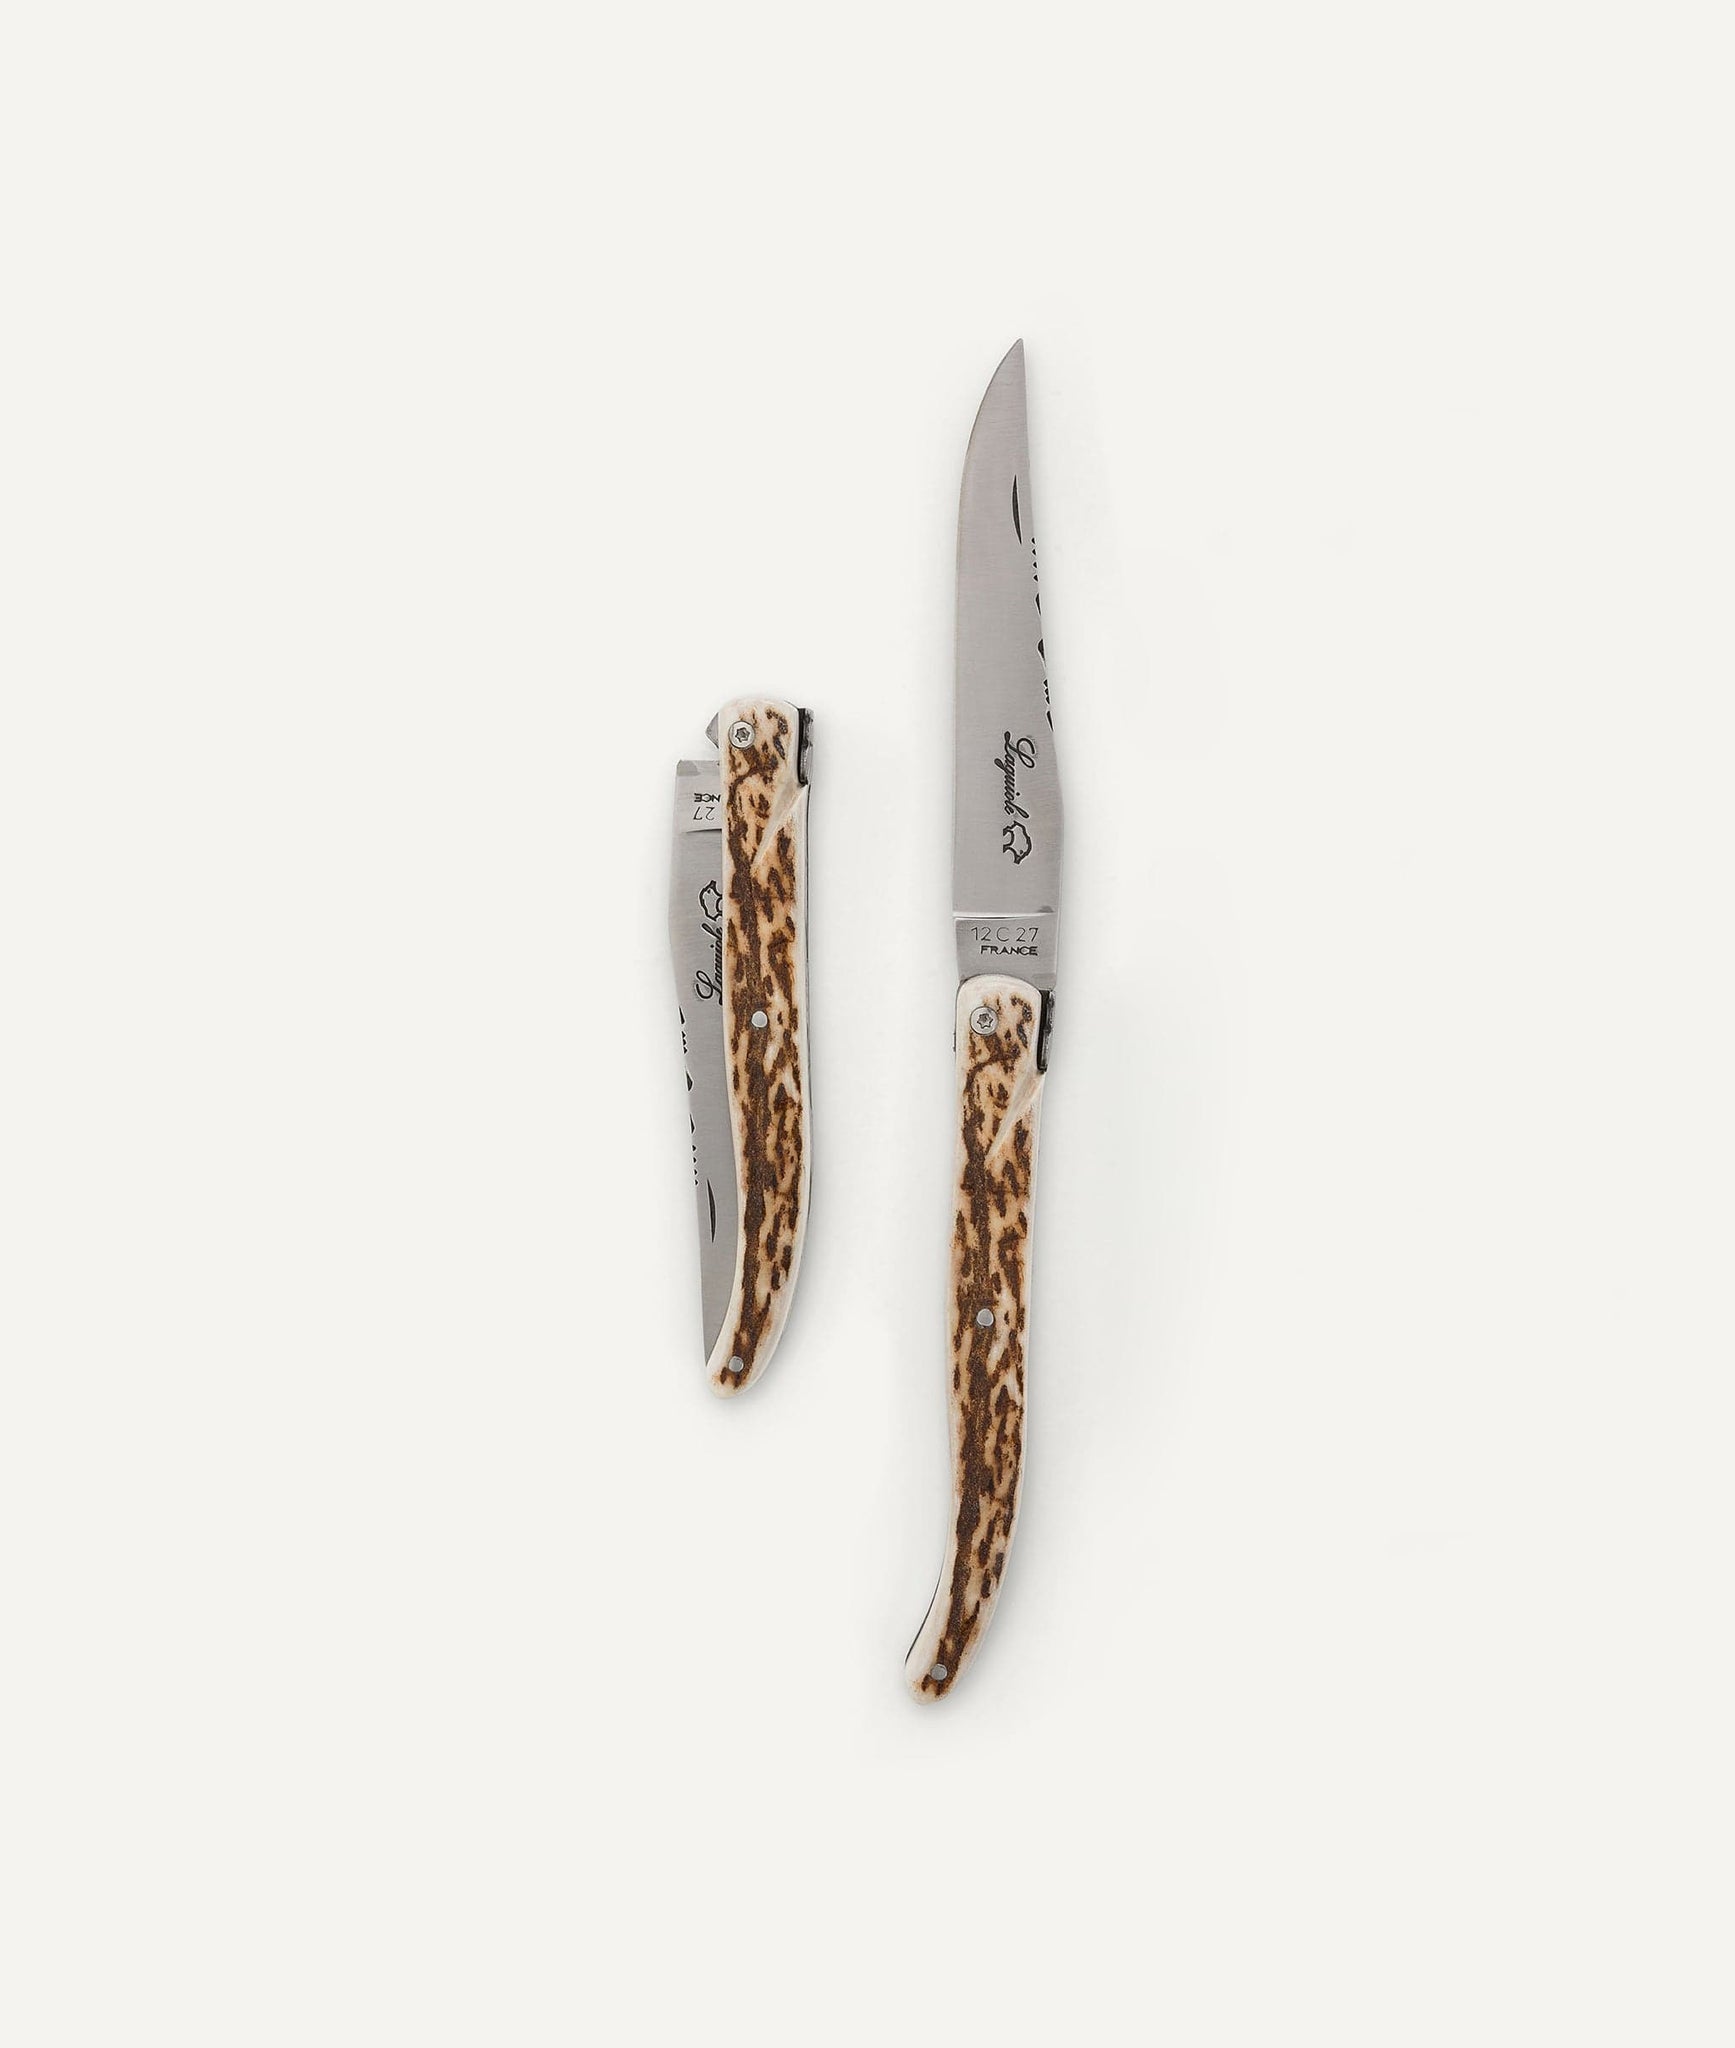 Knife with Antler Handle in Stainless Steel